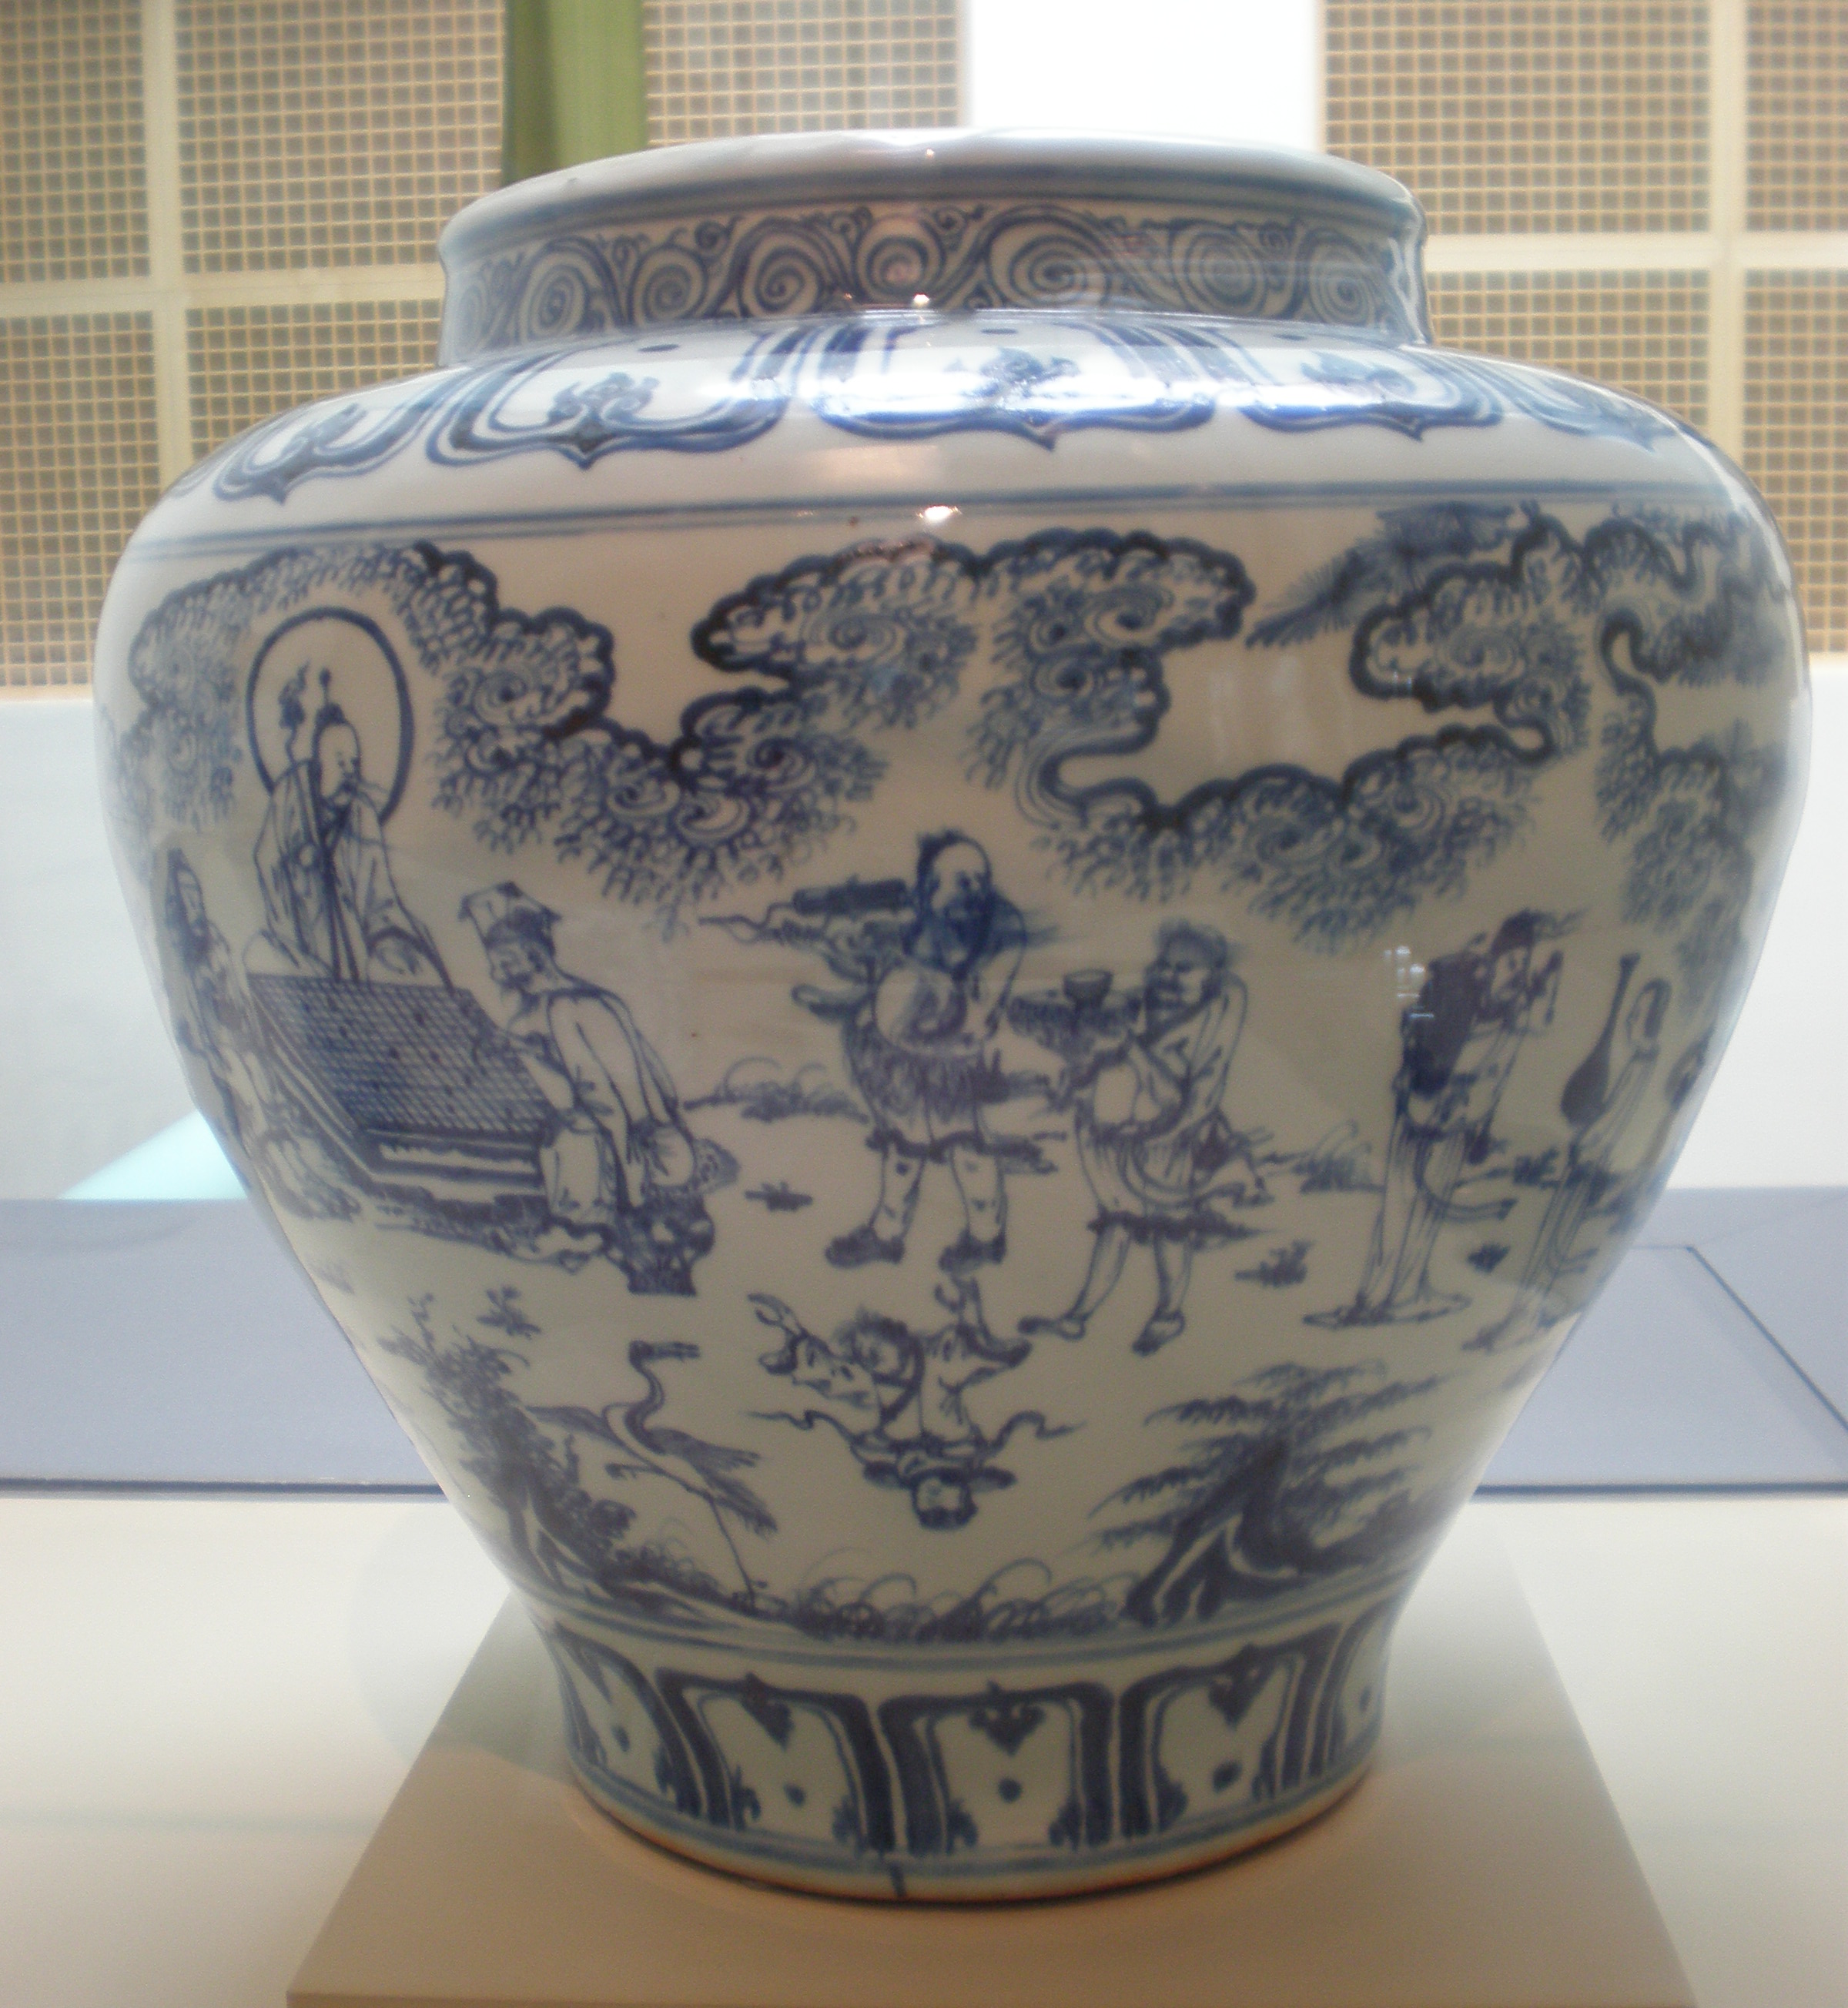 http://upload.wikimedia.org/wikipedia/commons/0/0f/Vase_with_scholars_Asian_Art_Museum_SF_B60P86.JPG